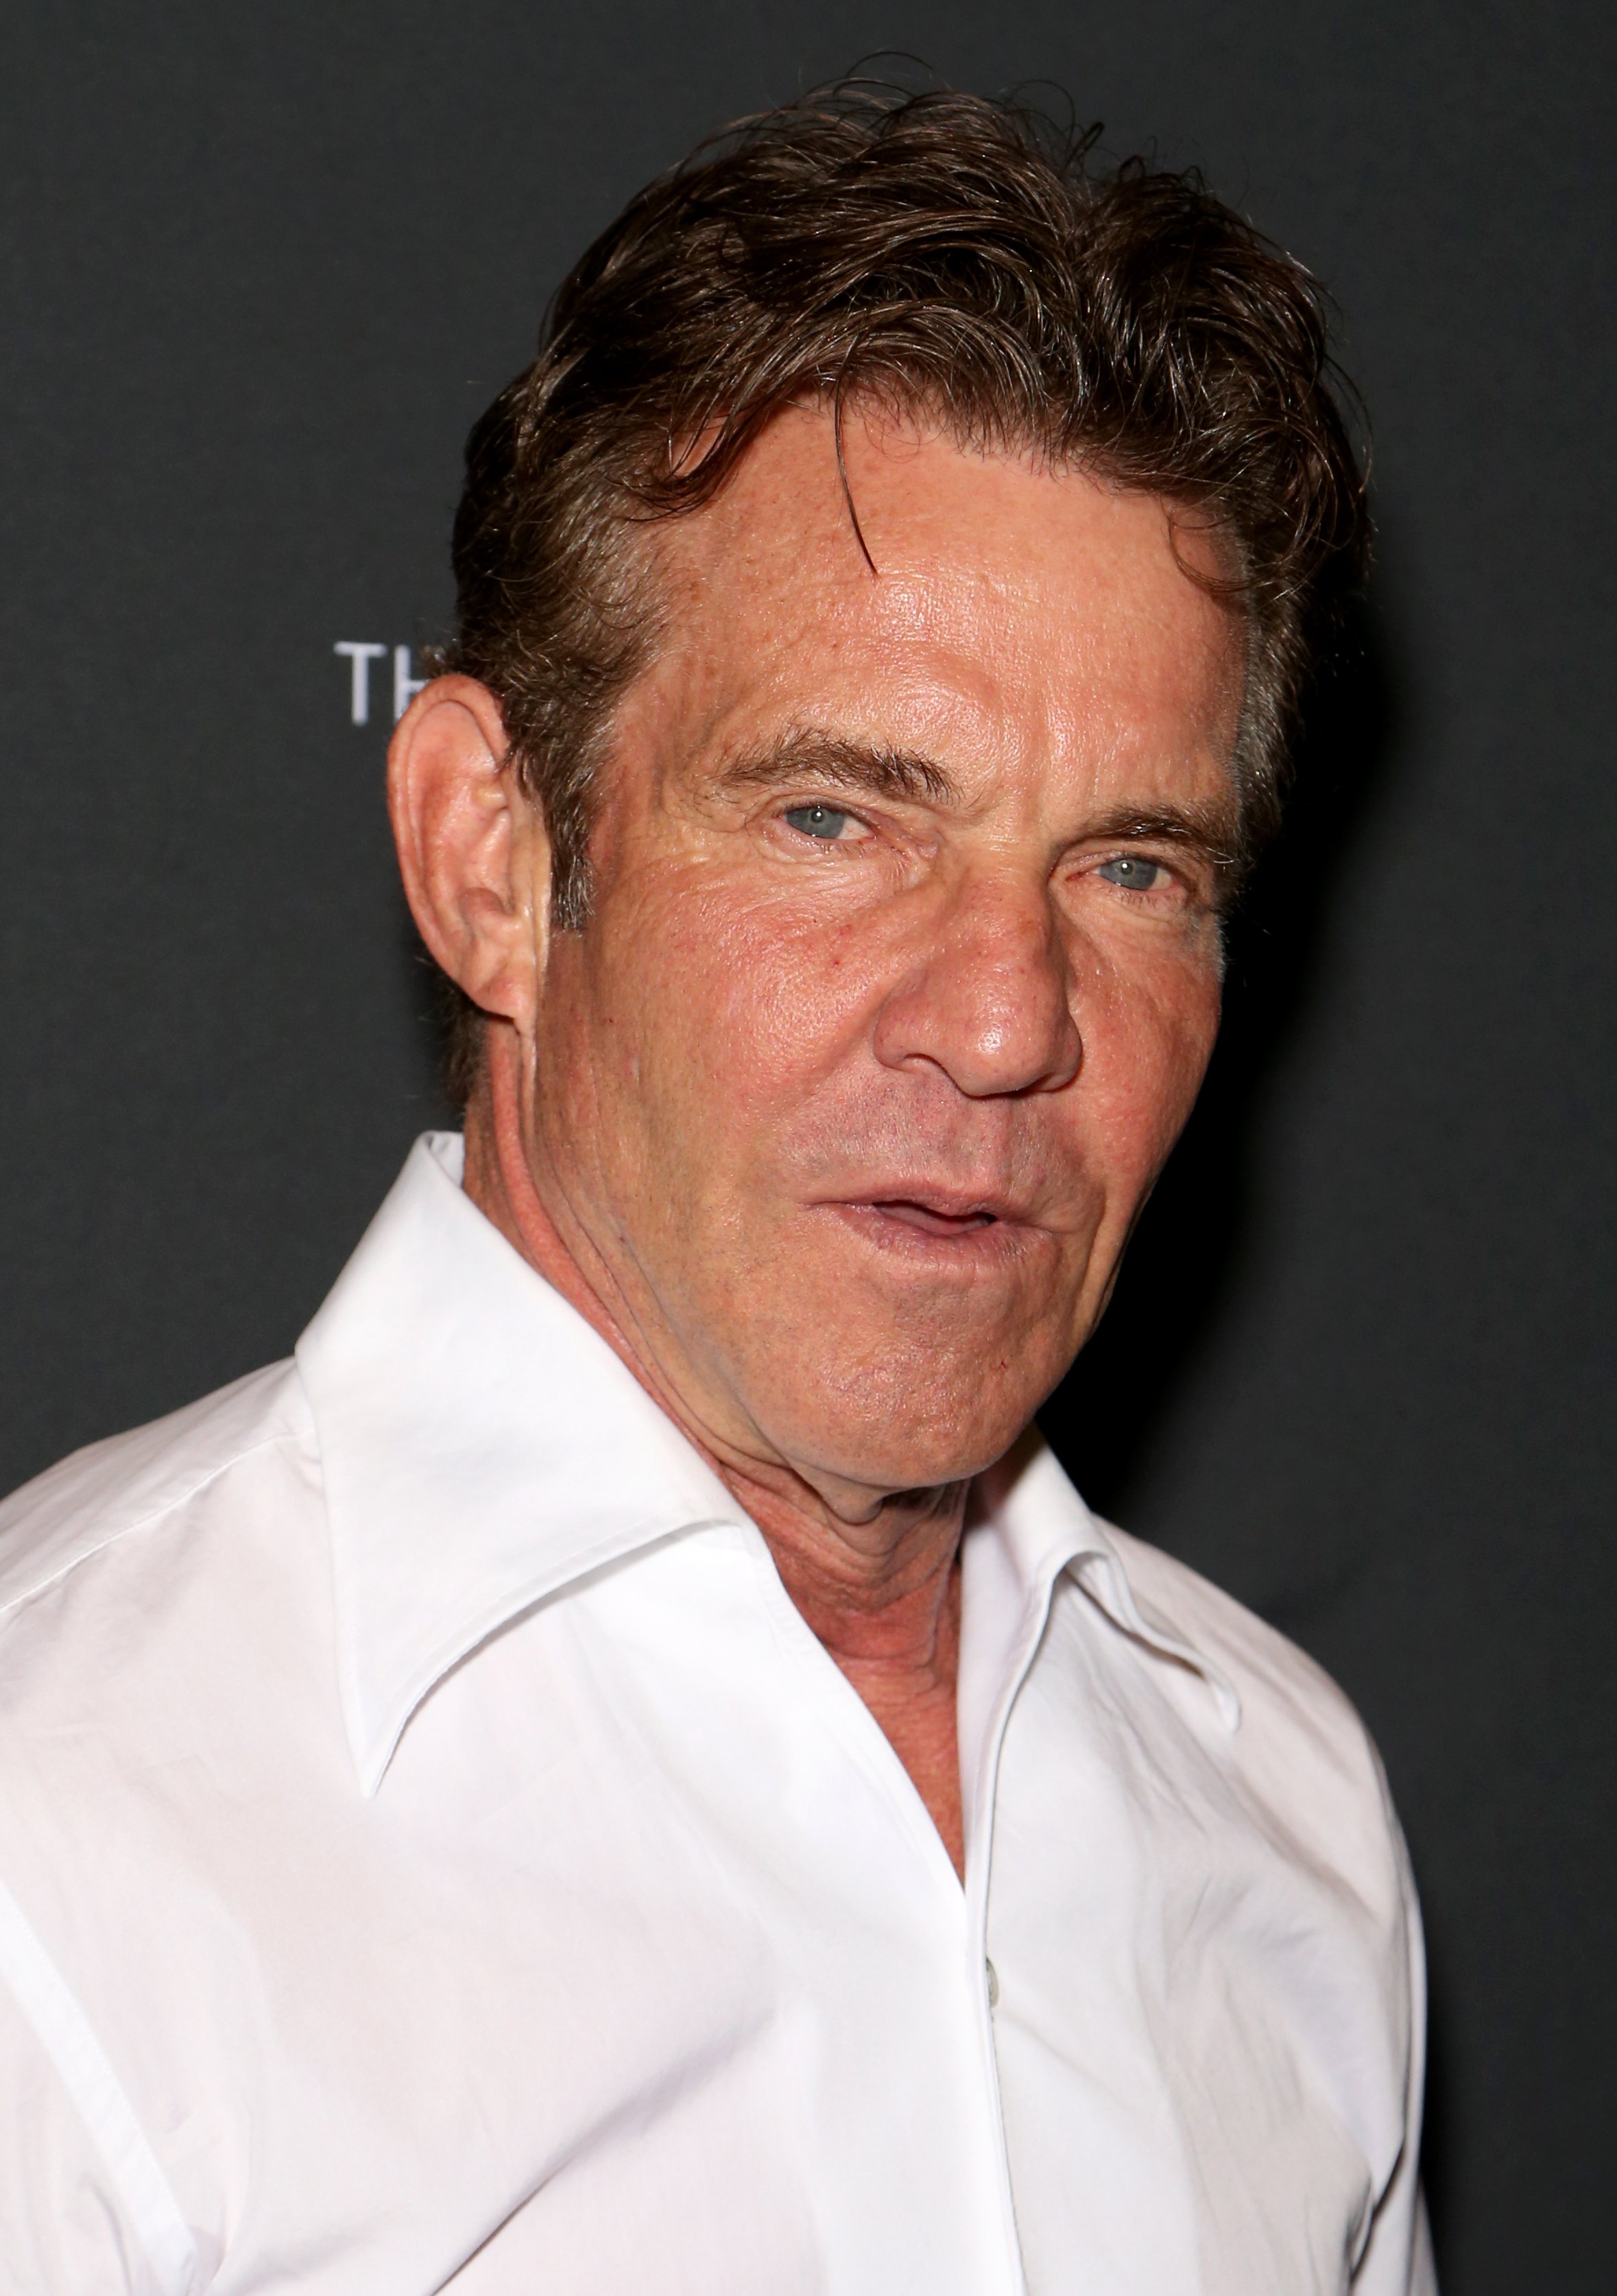 Dennis Quaid attends Dennis Quaid and the Sharks in Las Vegas, Nevada on May 11, 2019 | Photo: Getty Images